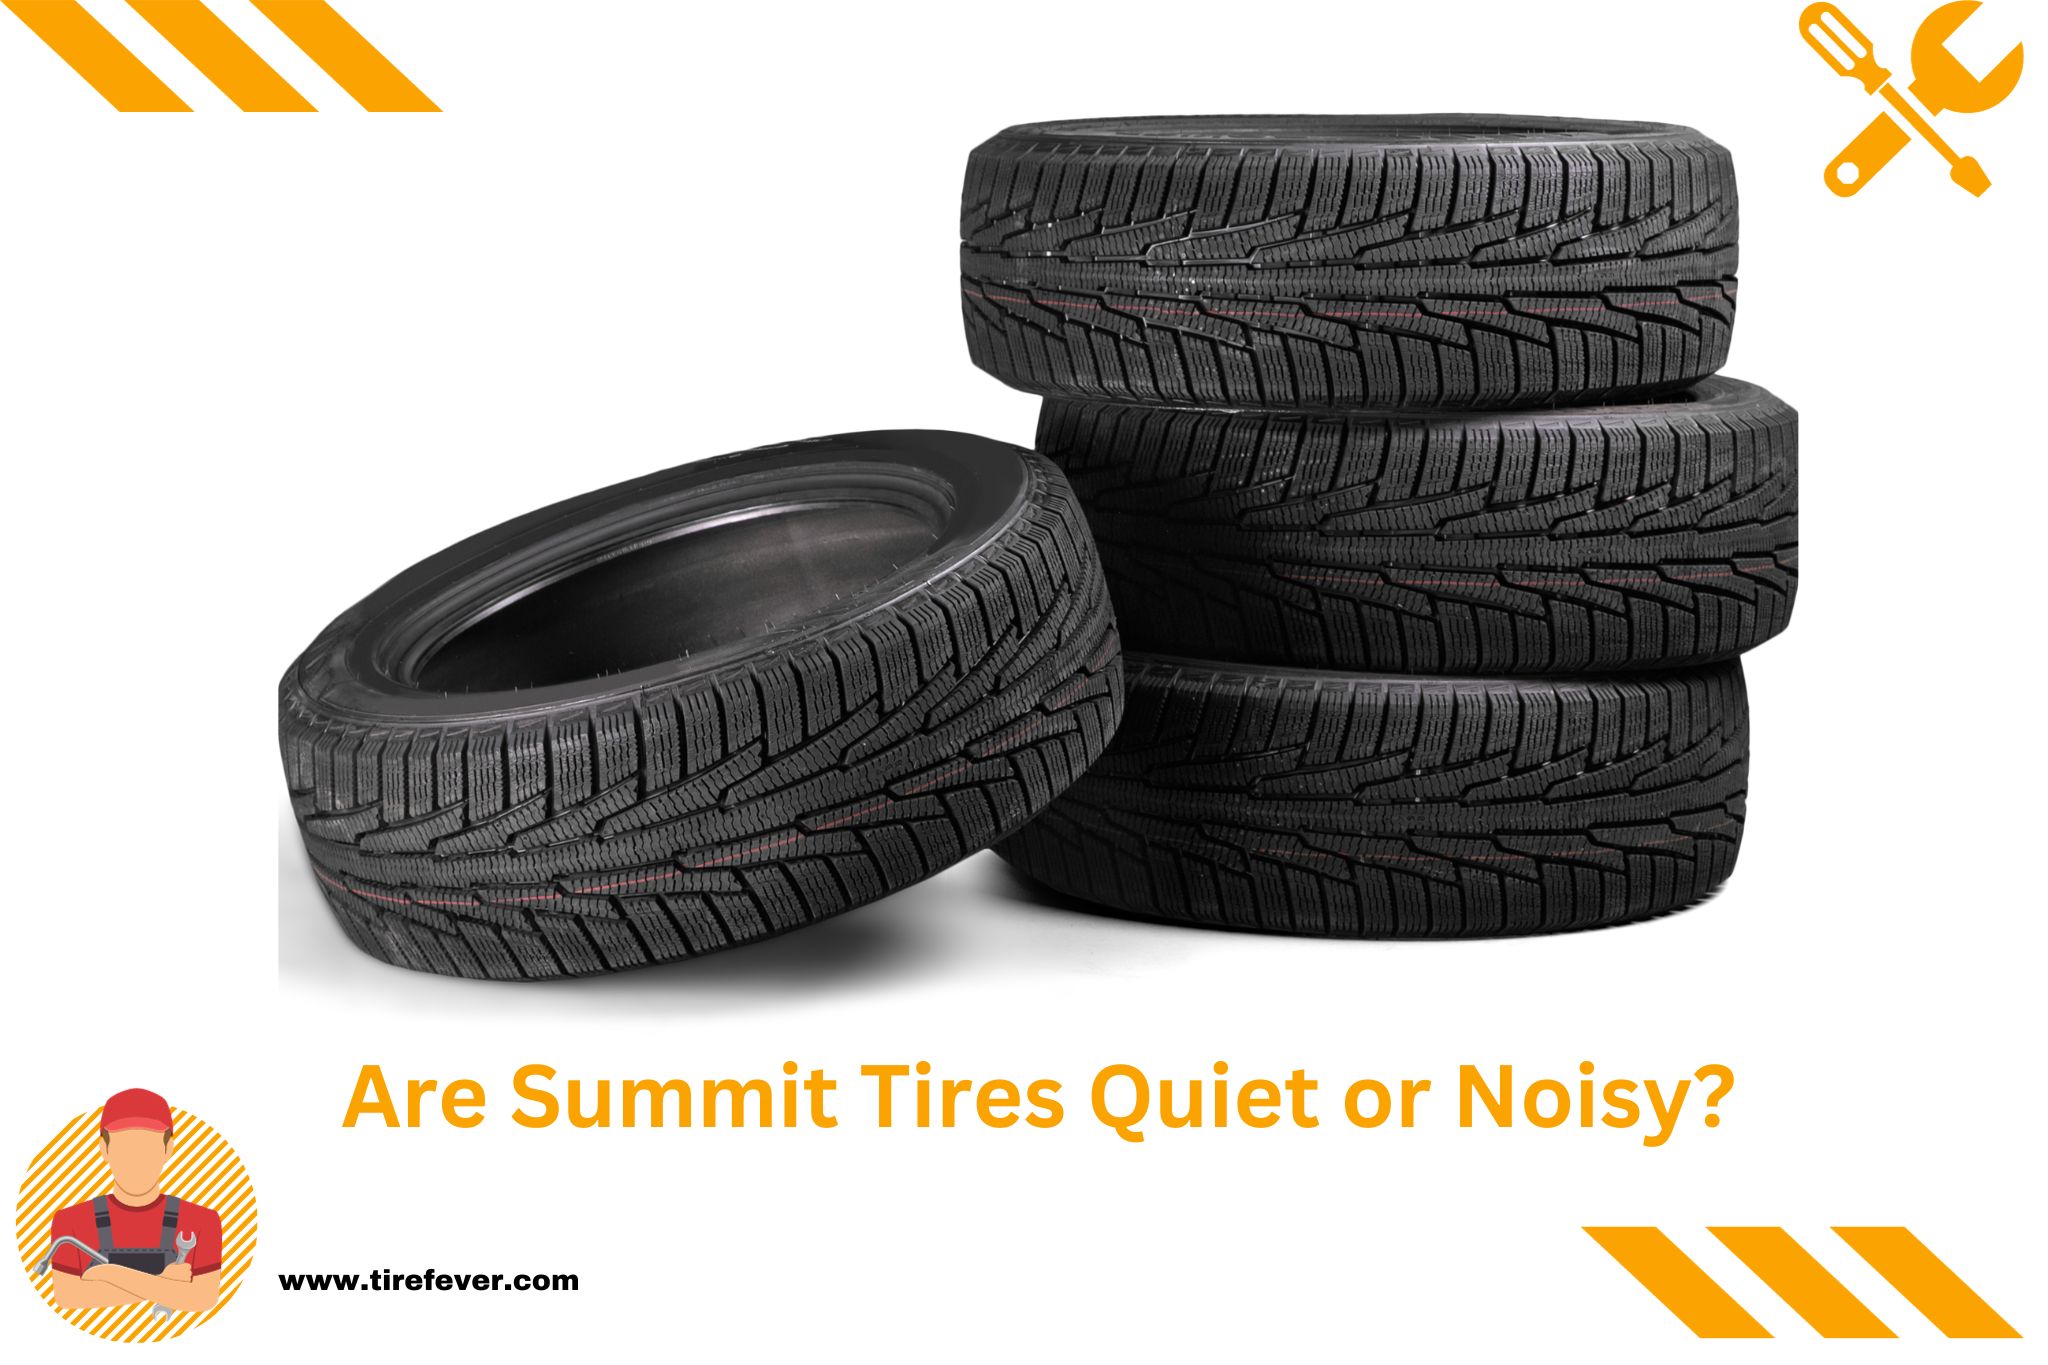 Are Summit Tires Quiet or Noisy?